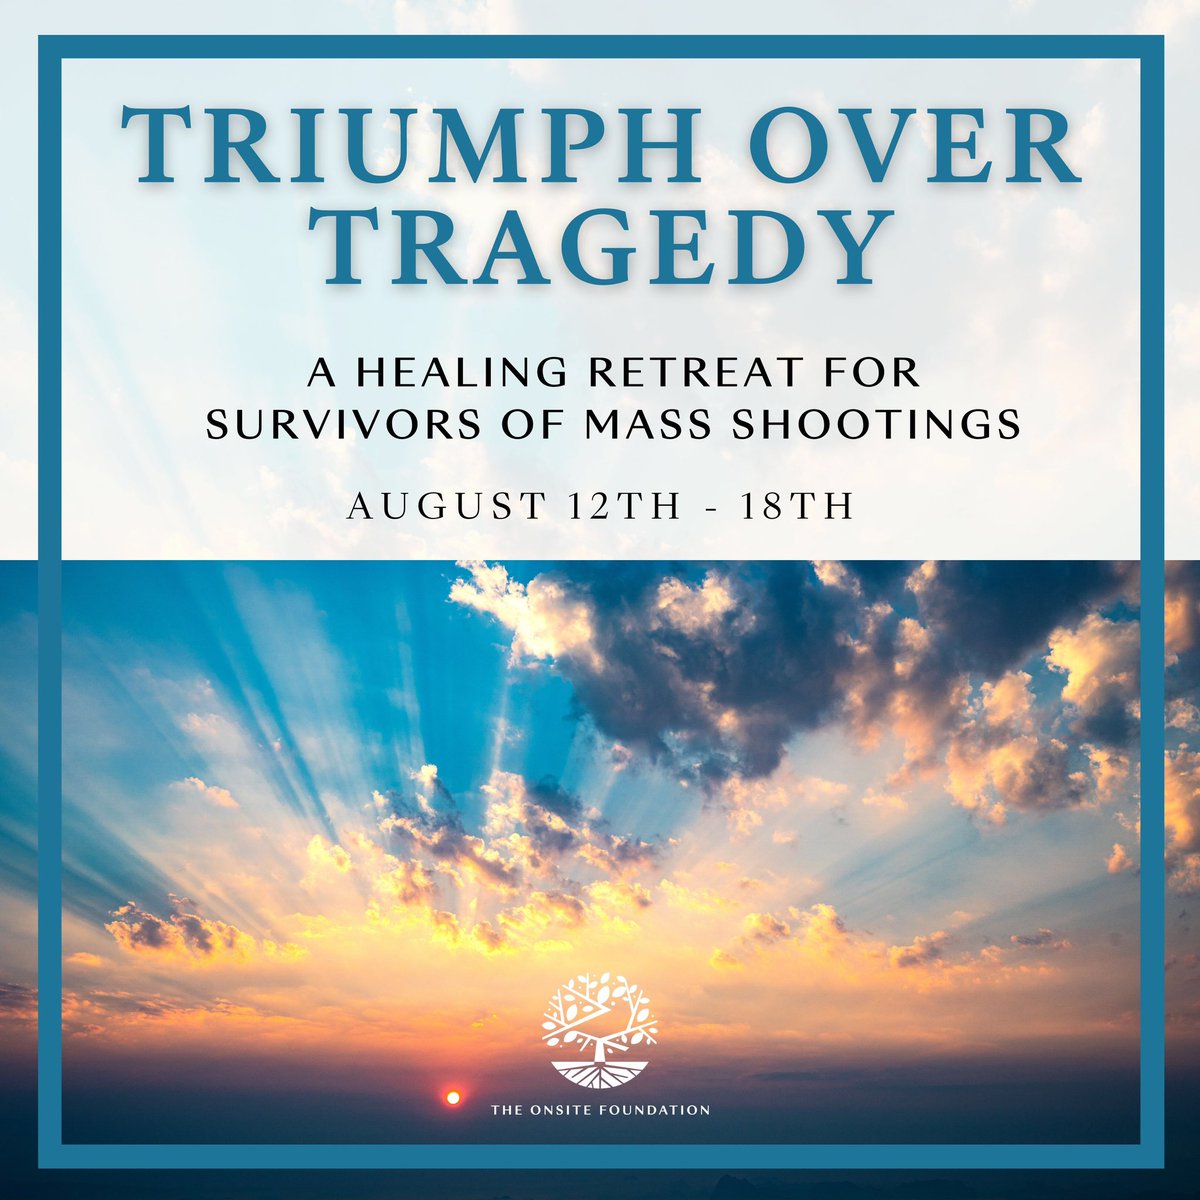 We have two spots left for our Triumph Over Tragedy Program taking place August 12-18th. The Triumph Over Tragedy program for survivors of mass shooting is a 6-day therapeutic workshop created in partnership with @onsiteworkshops. To register: theonsitefoundation.org/programs/trium…